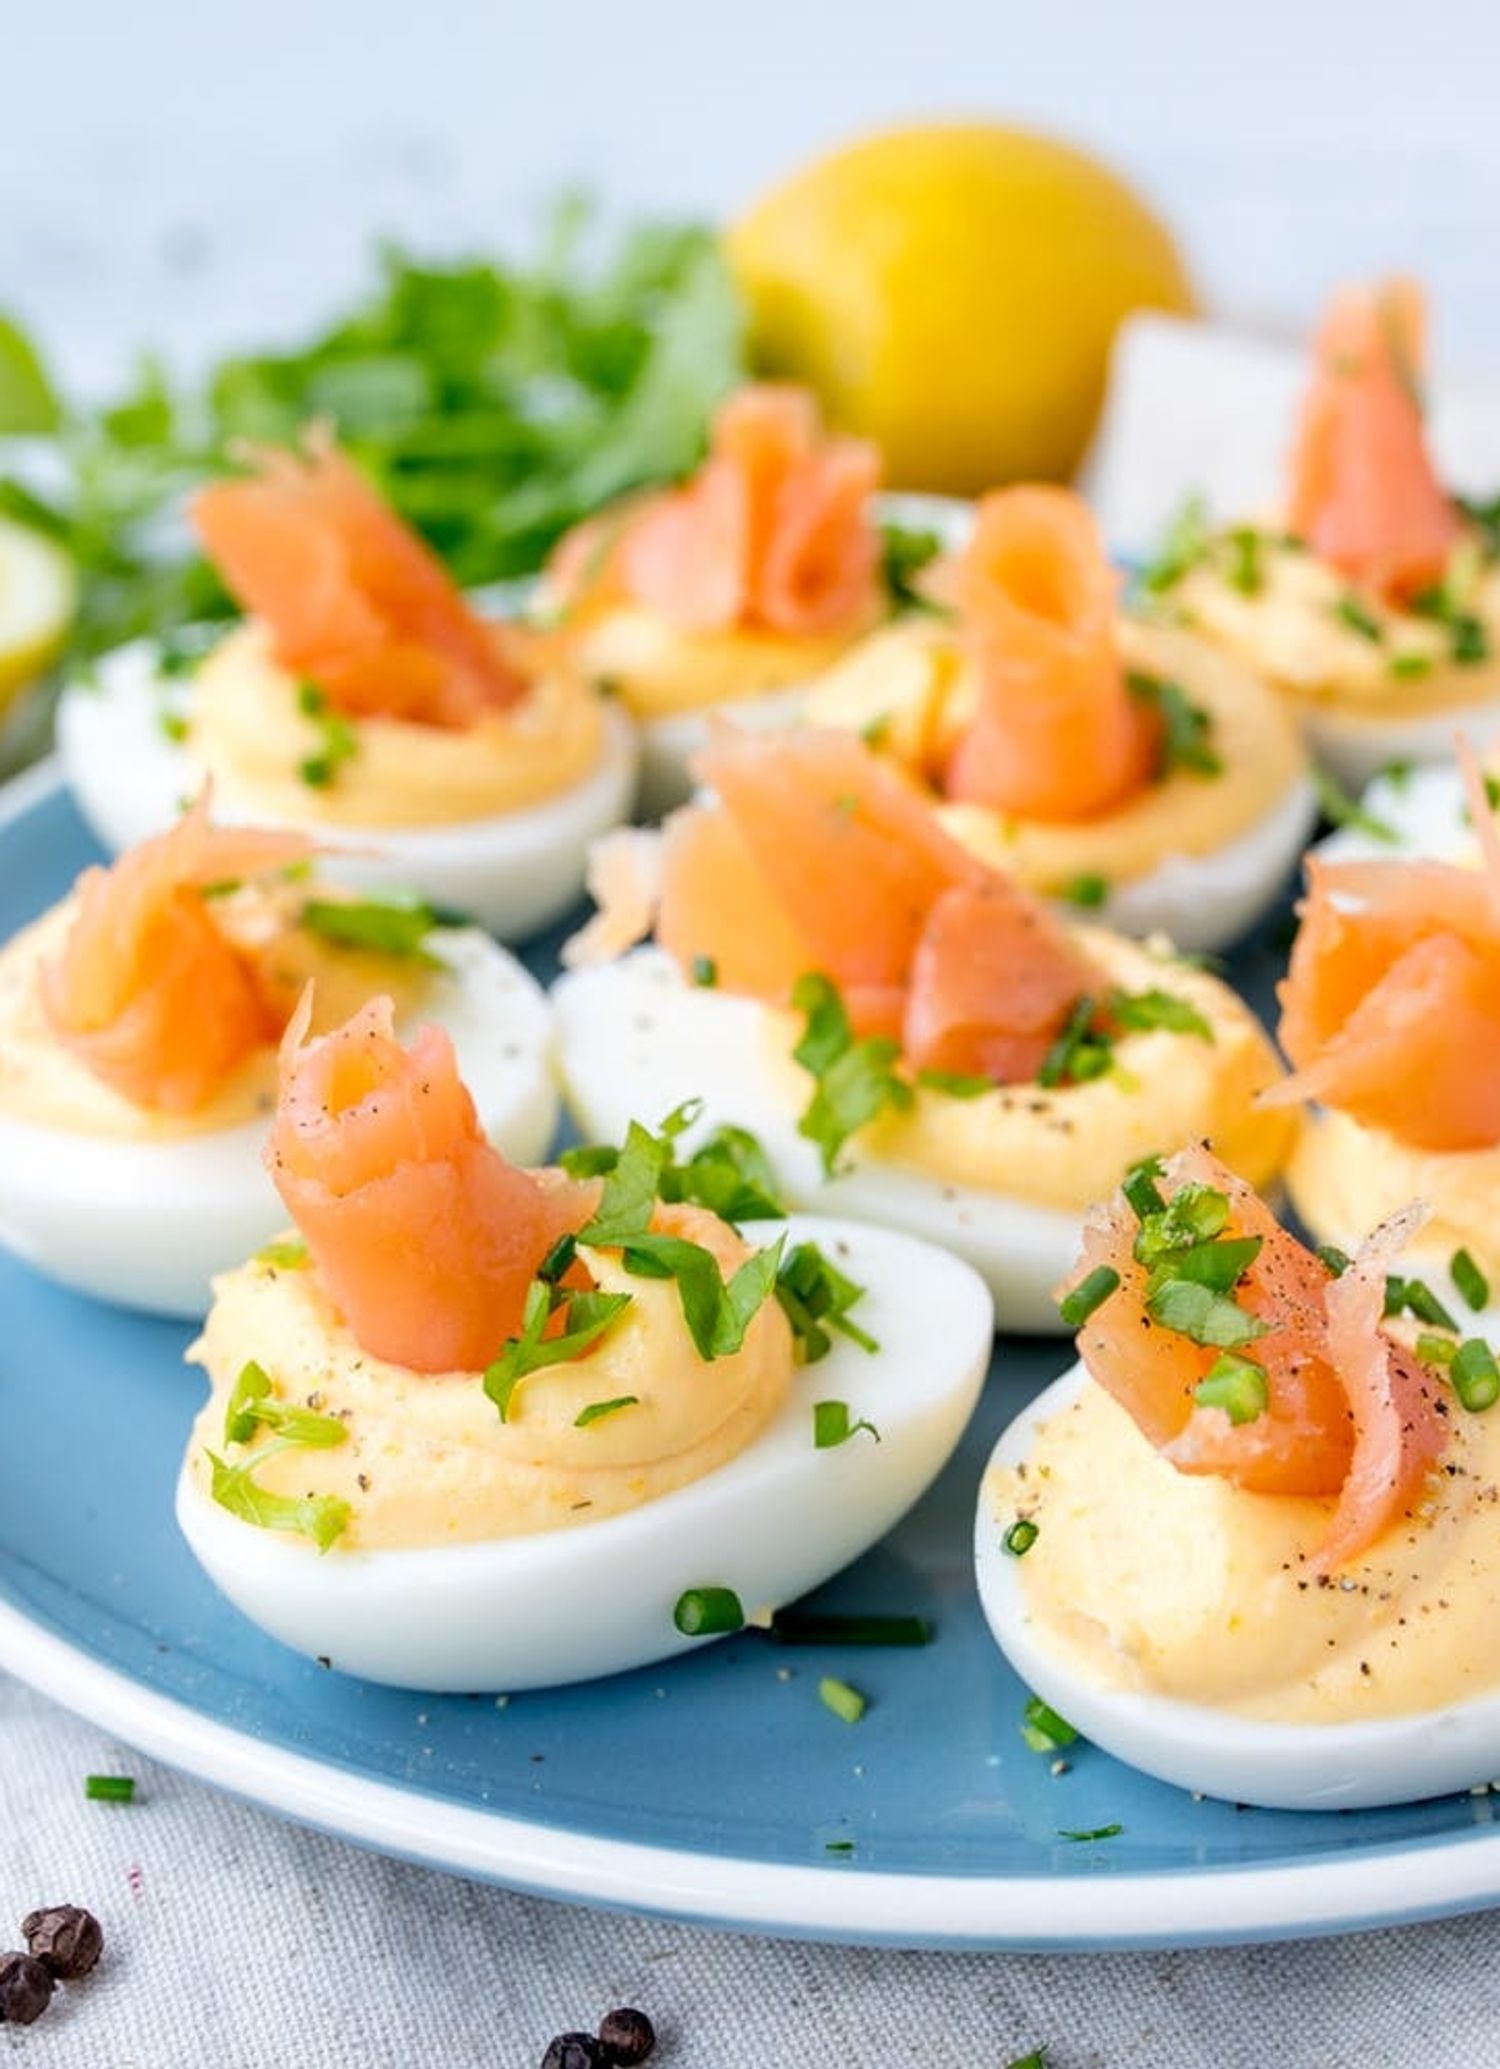 Try Our Low-Carb Smoked Salmon Deviled Eggs Recipe! - Brit + Co